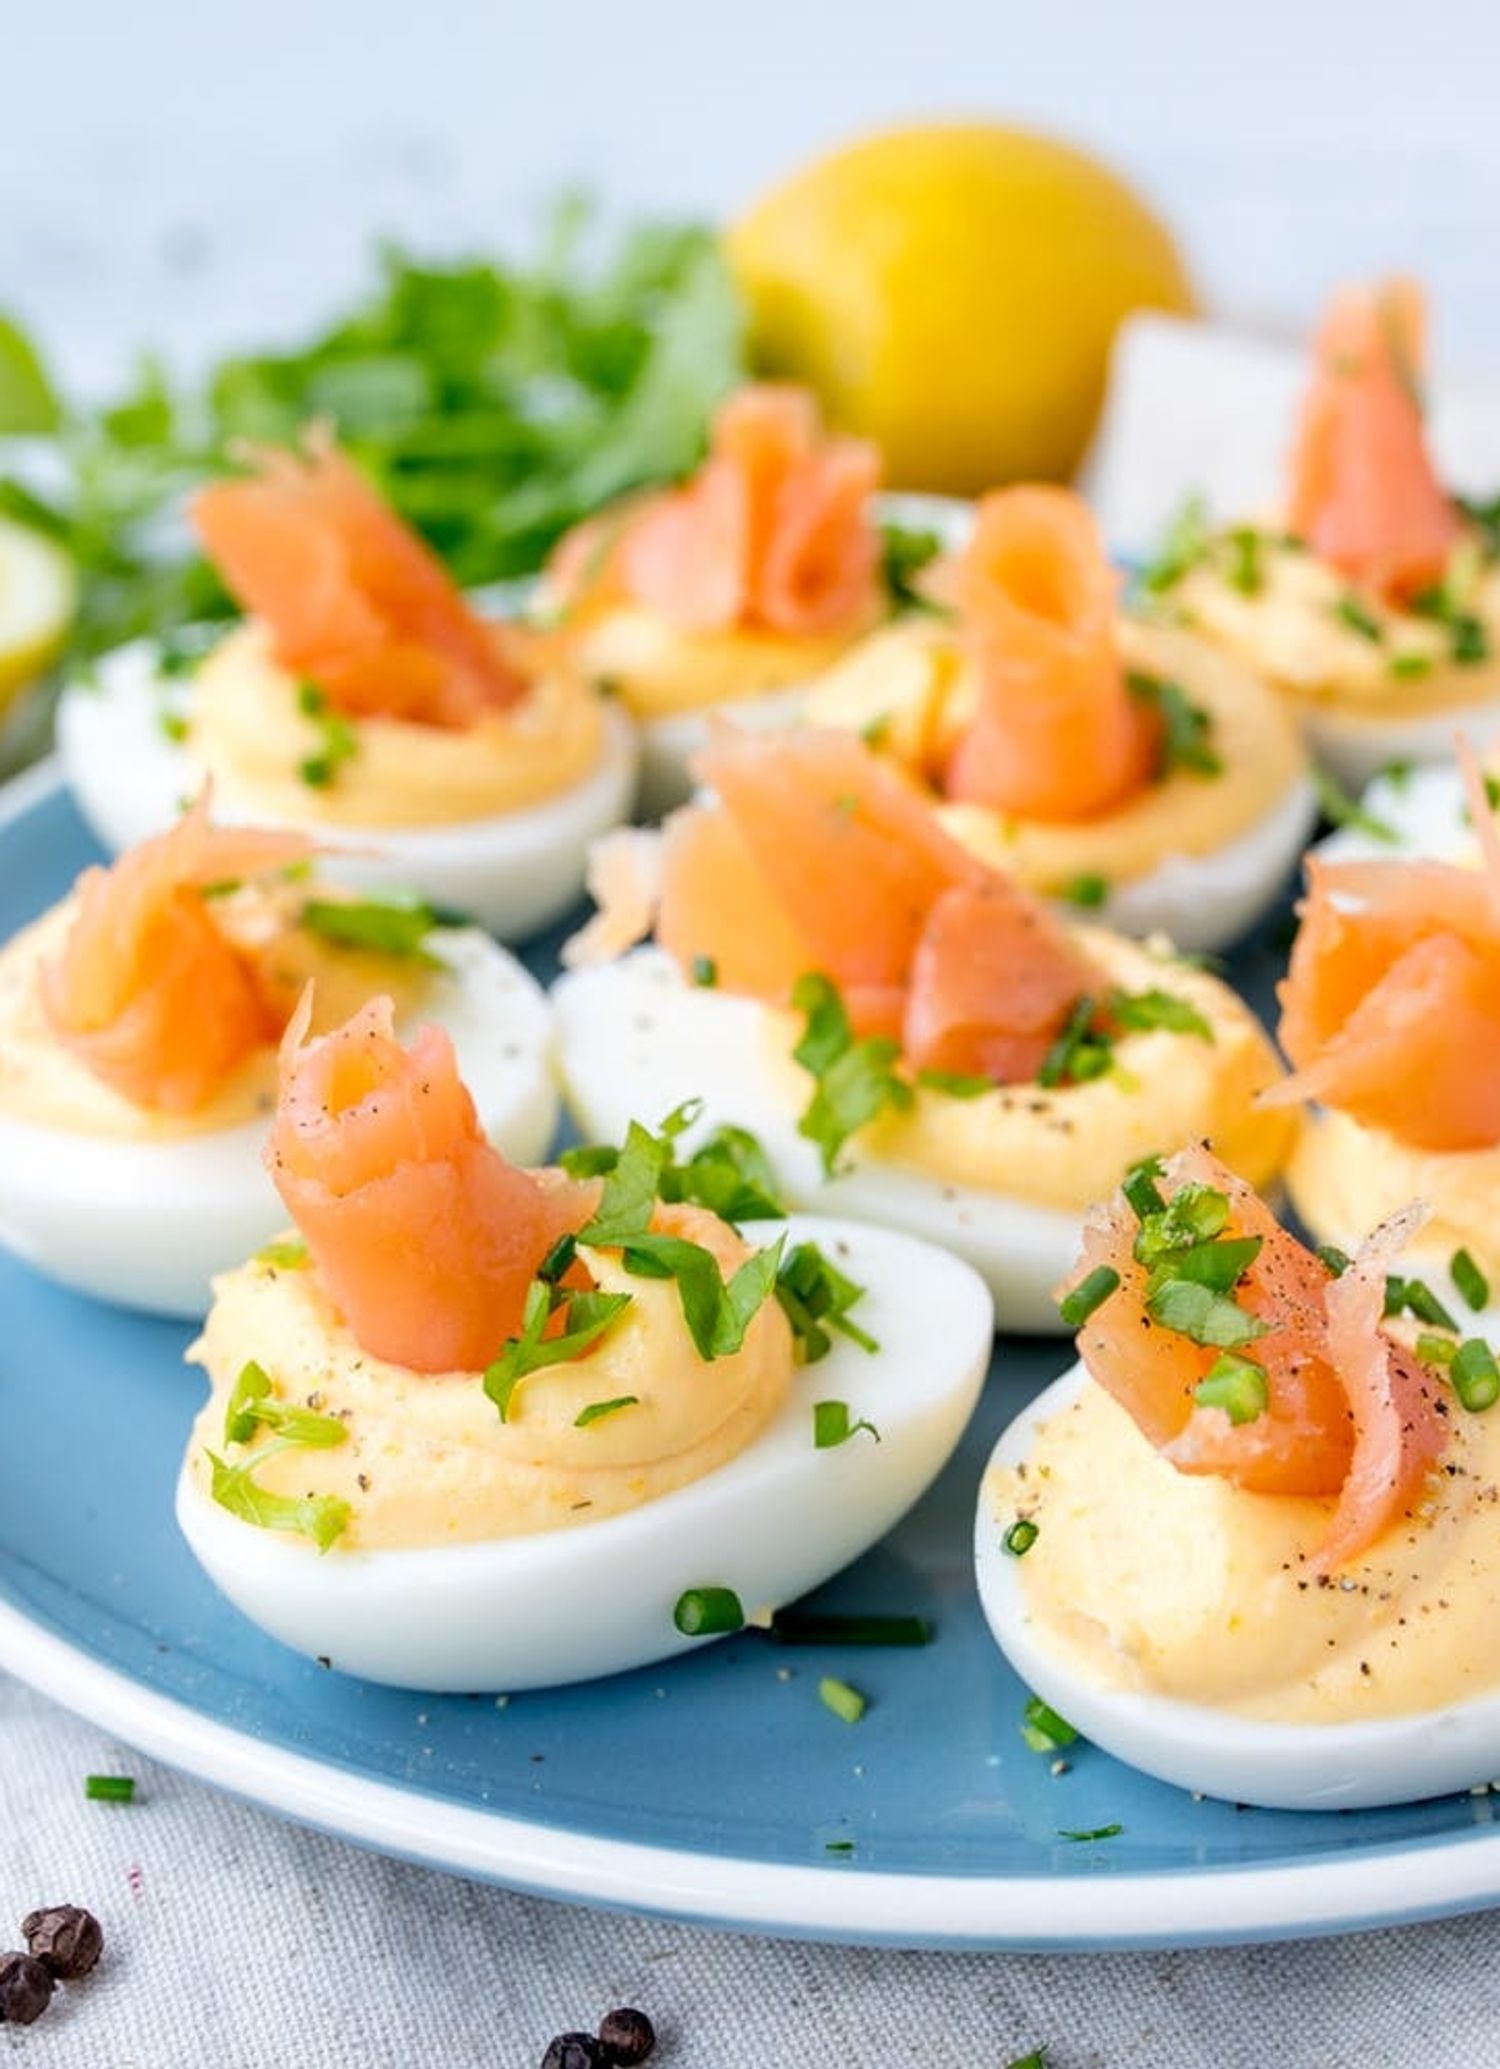 Try Our Low-Carb Smoked Salmon Deviled Eggs Recipe! - Brit + Co